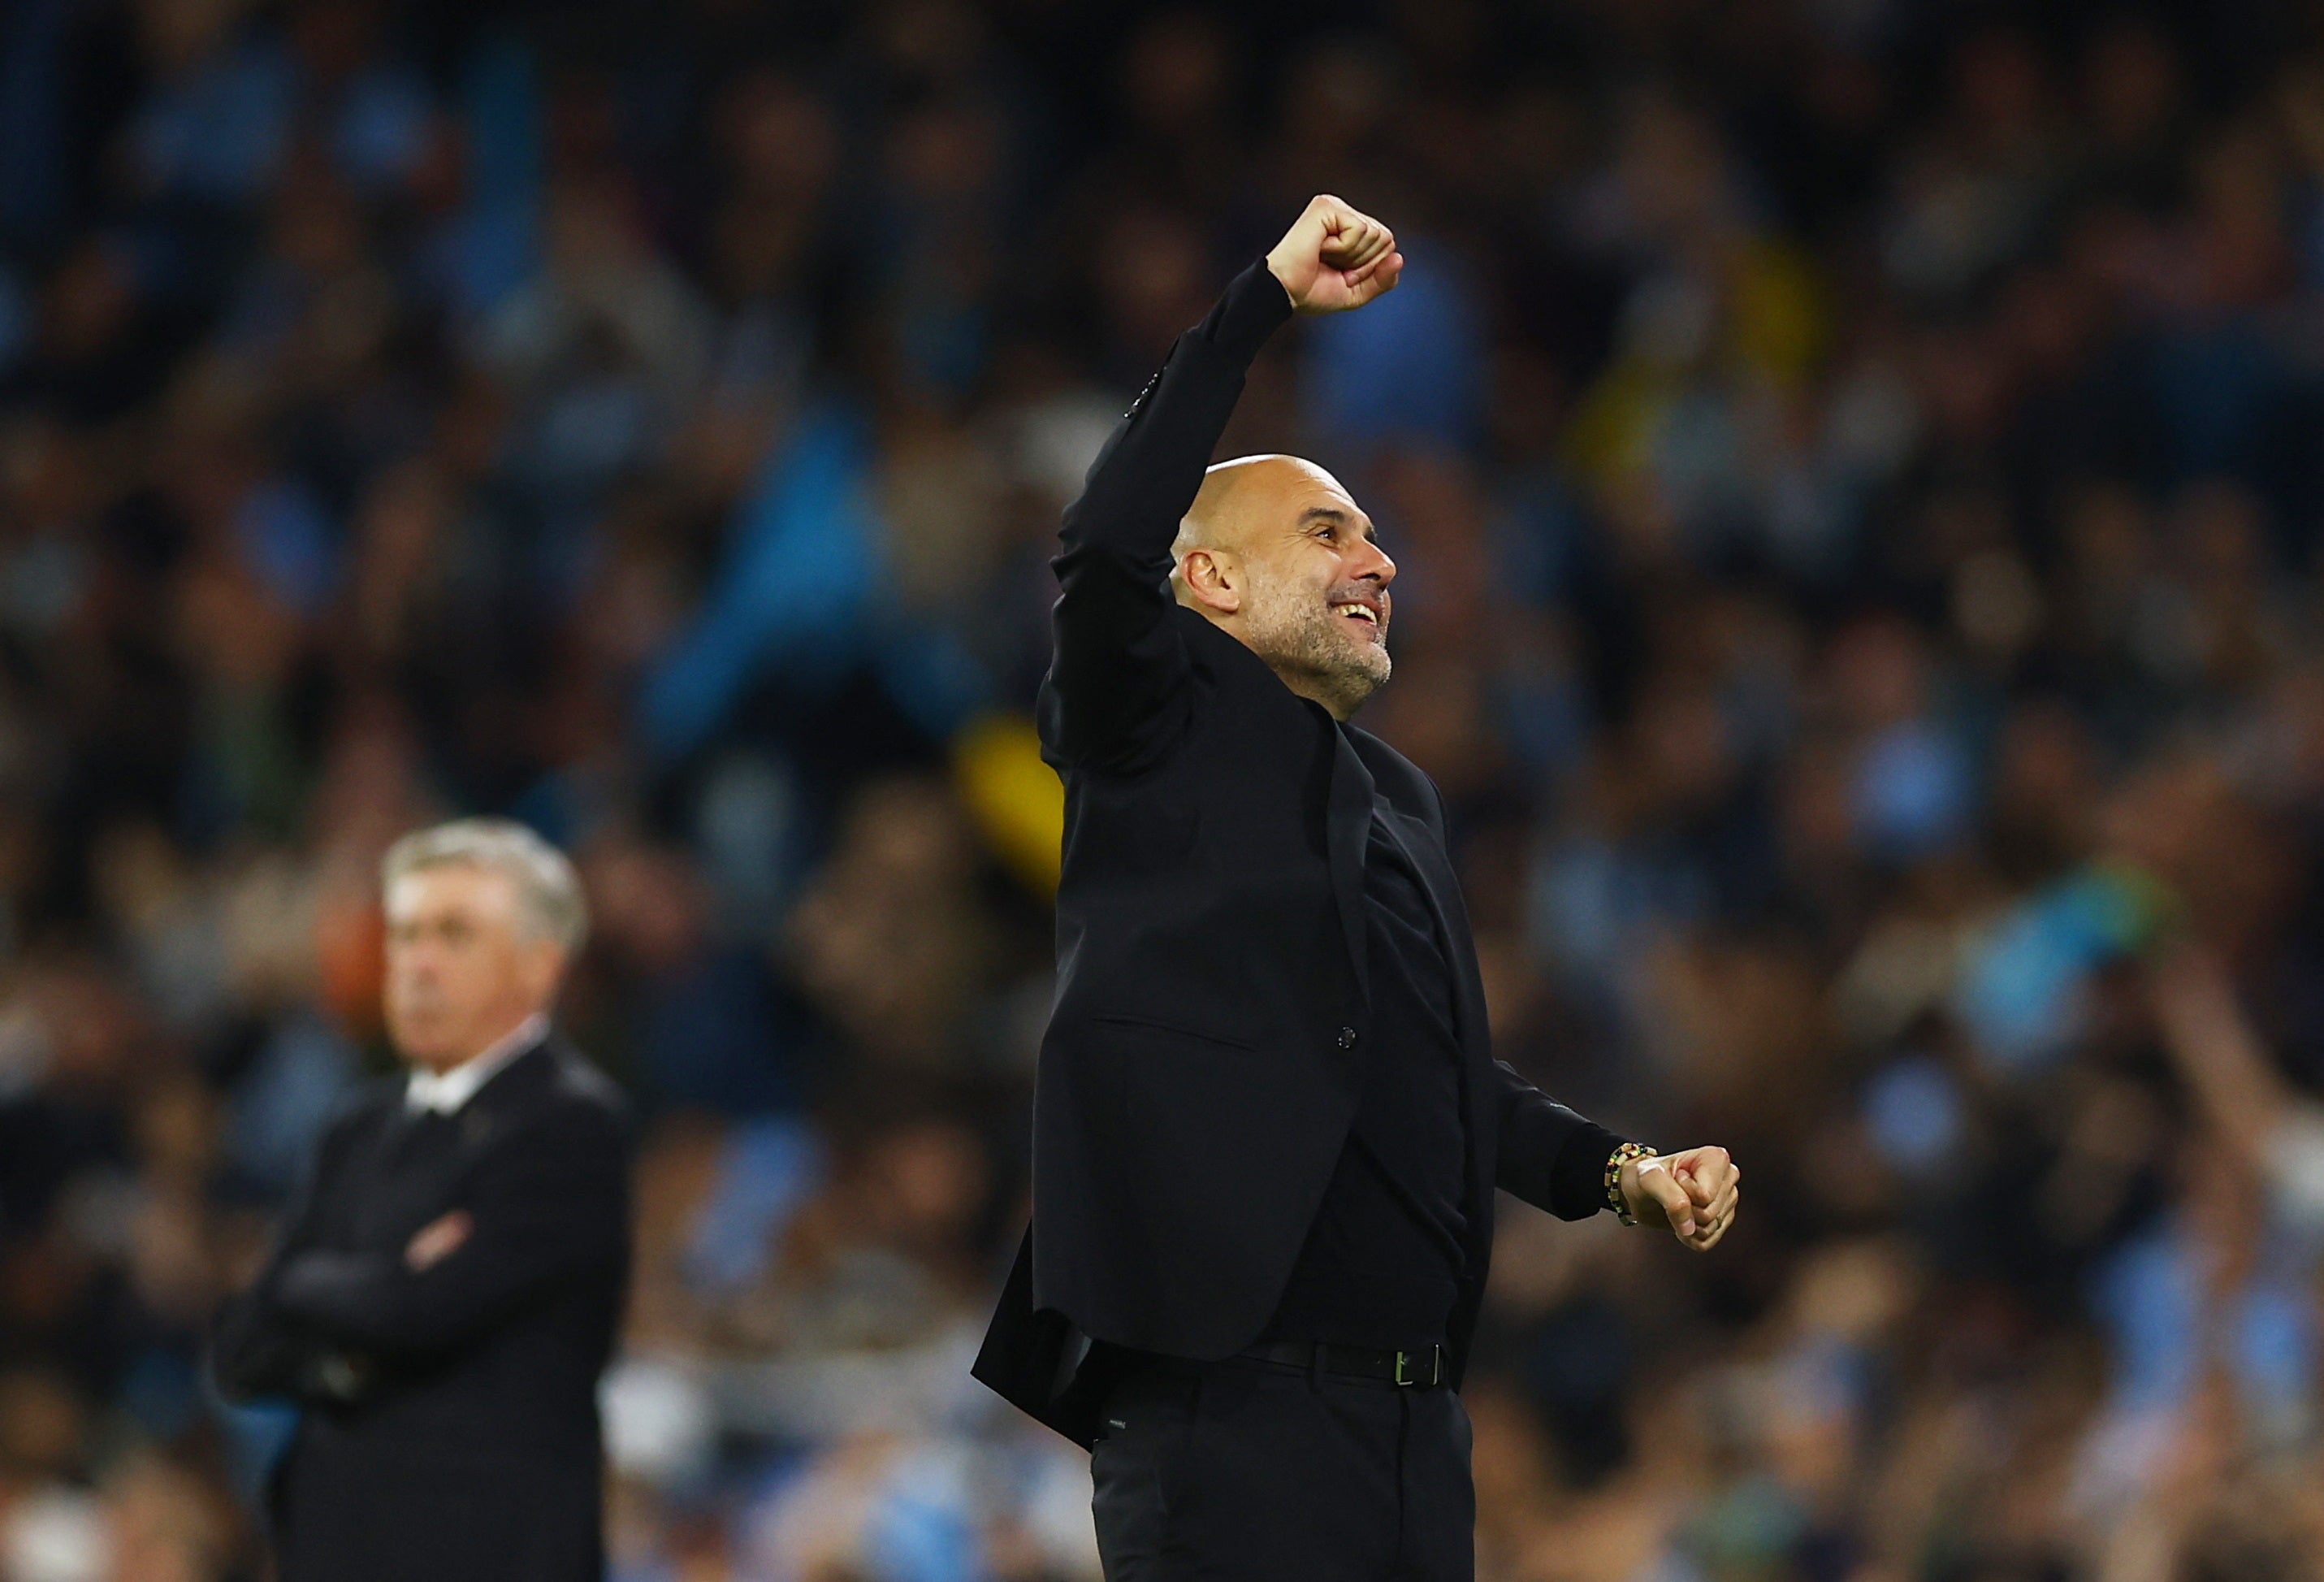 Pep Guardiola has reached levels of perfection in an environment built for and by him